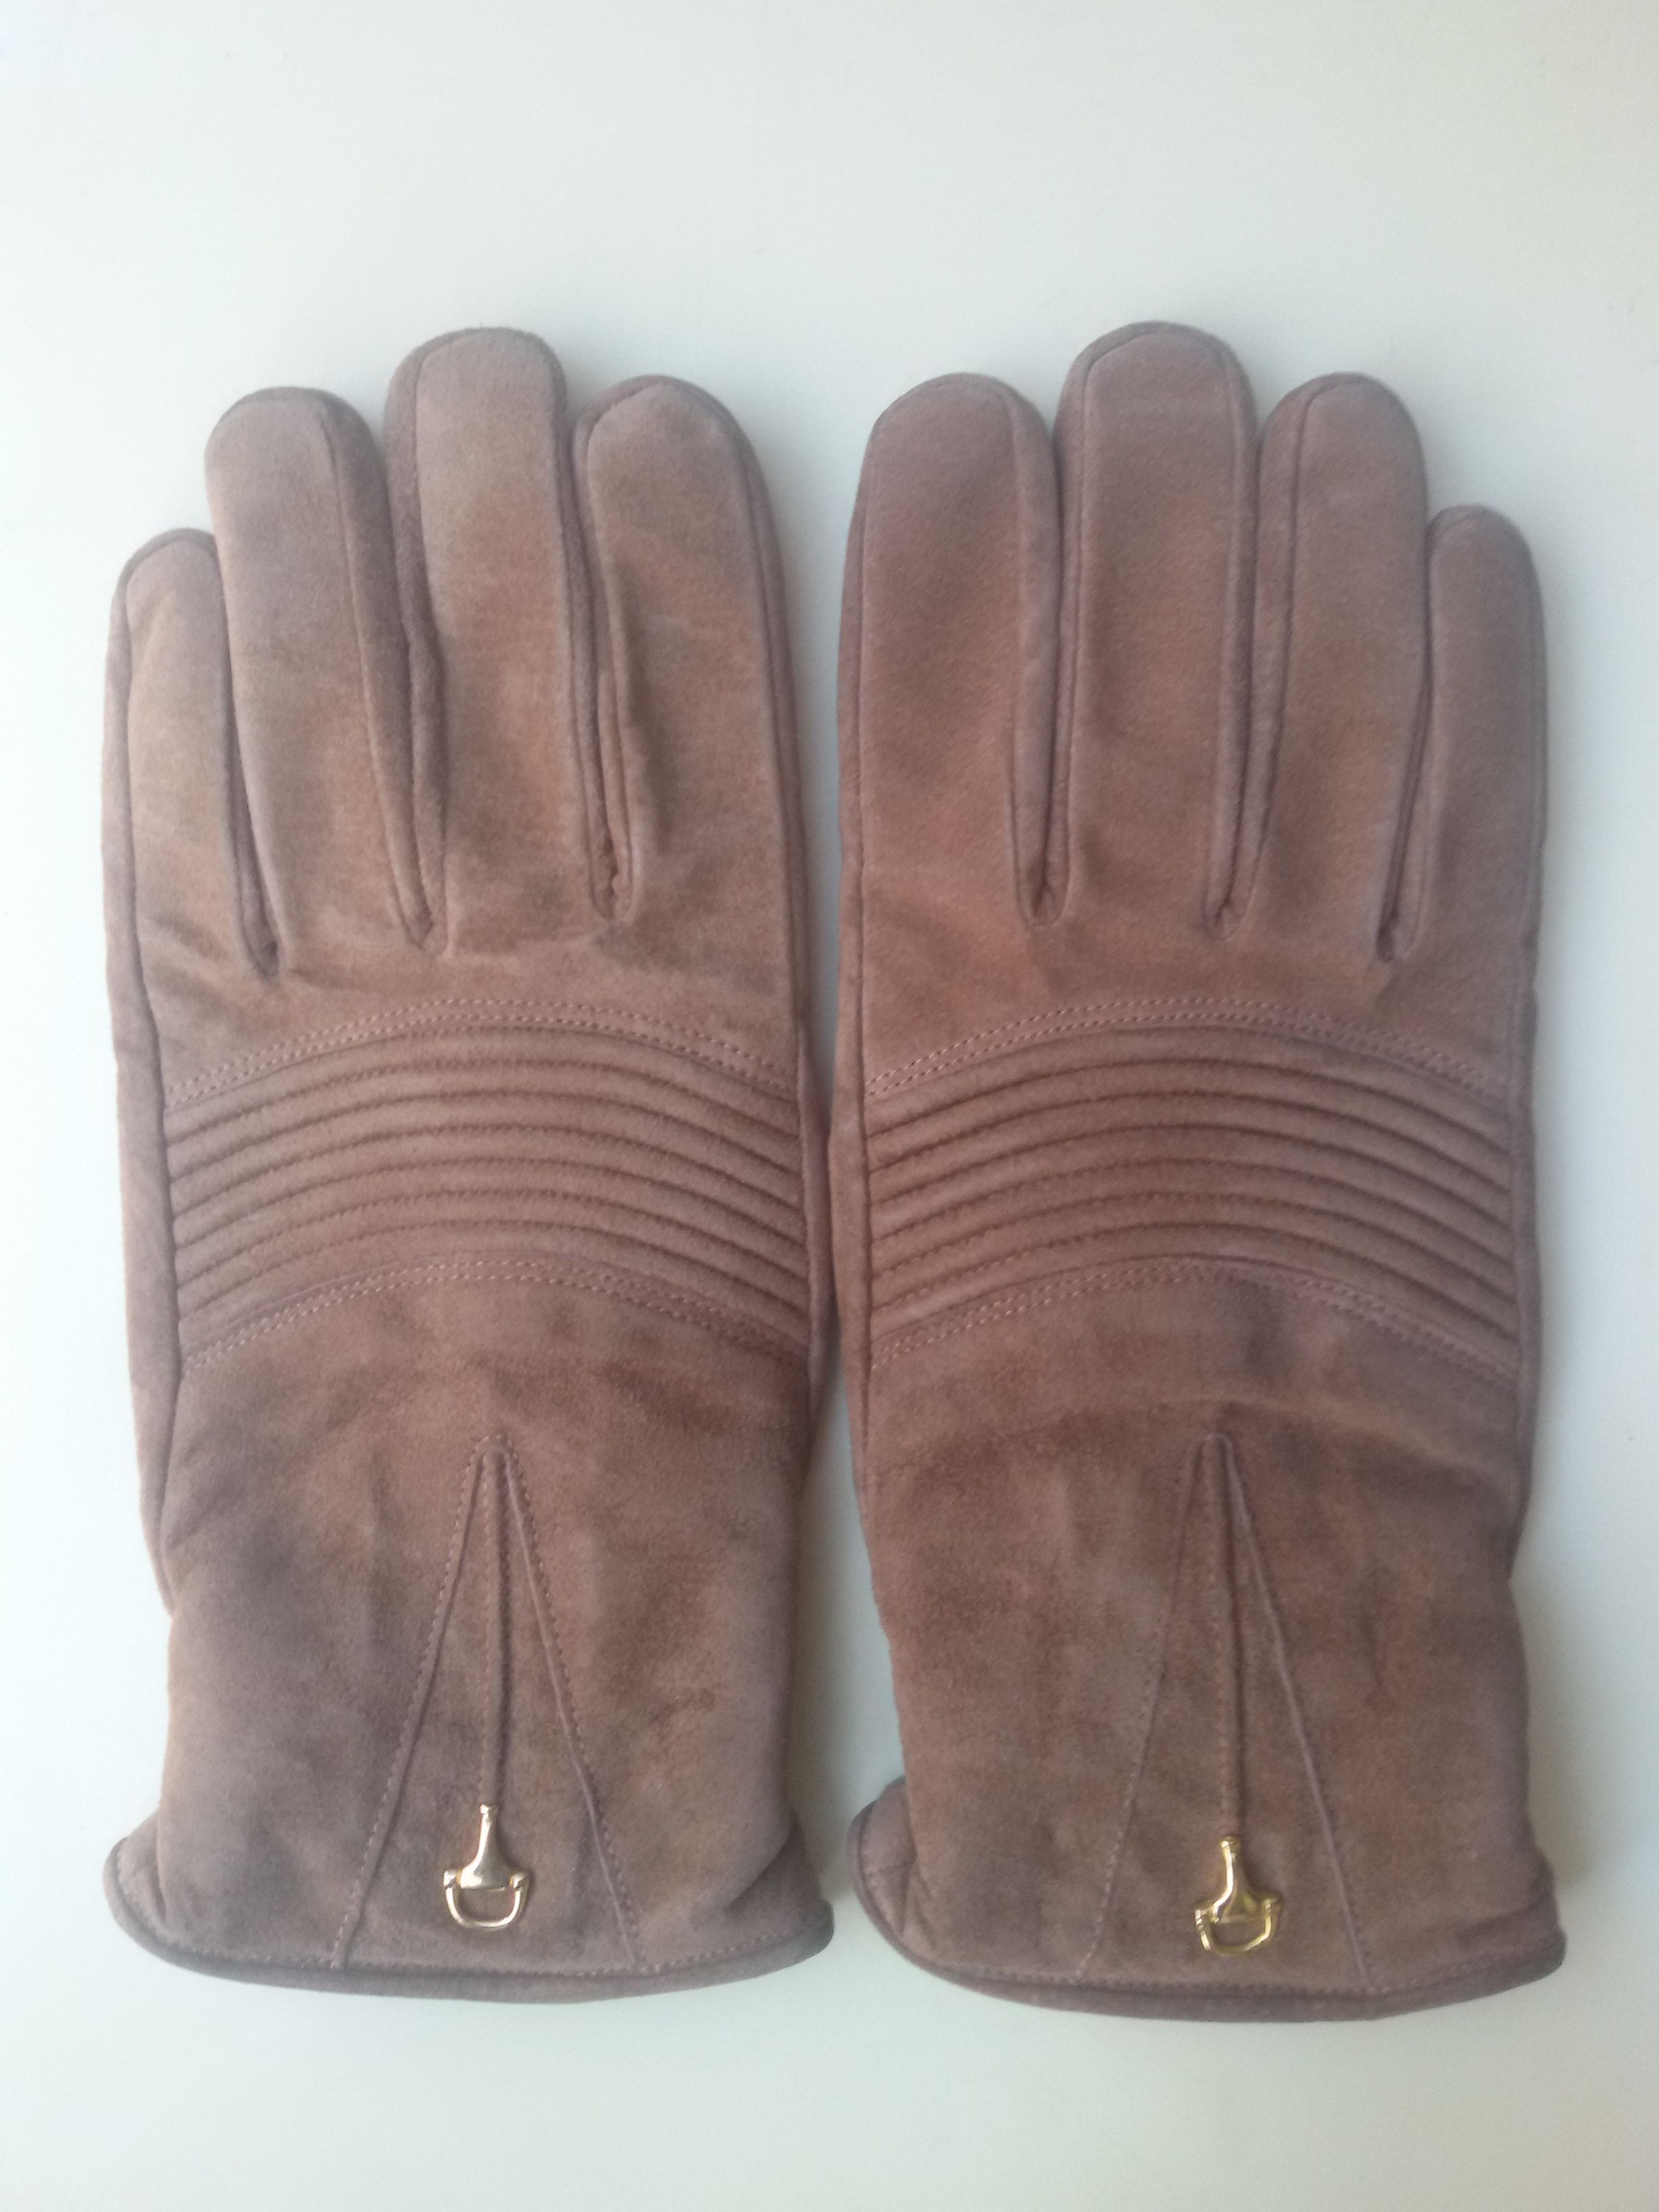 Gucci GUCCI Gloves Suede Leather Size 11 Vintage 1980's Size ONE SIZE - 1 Preview